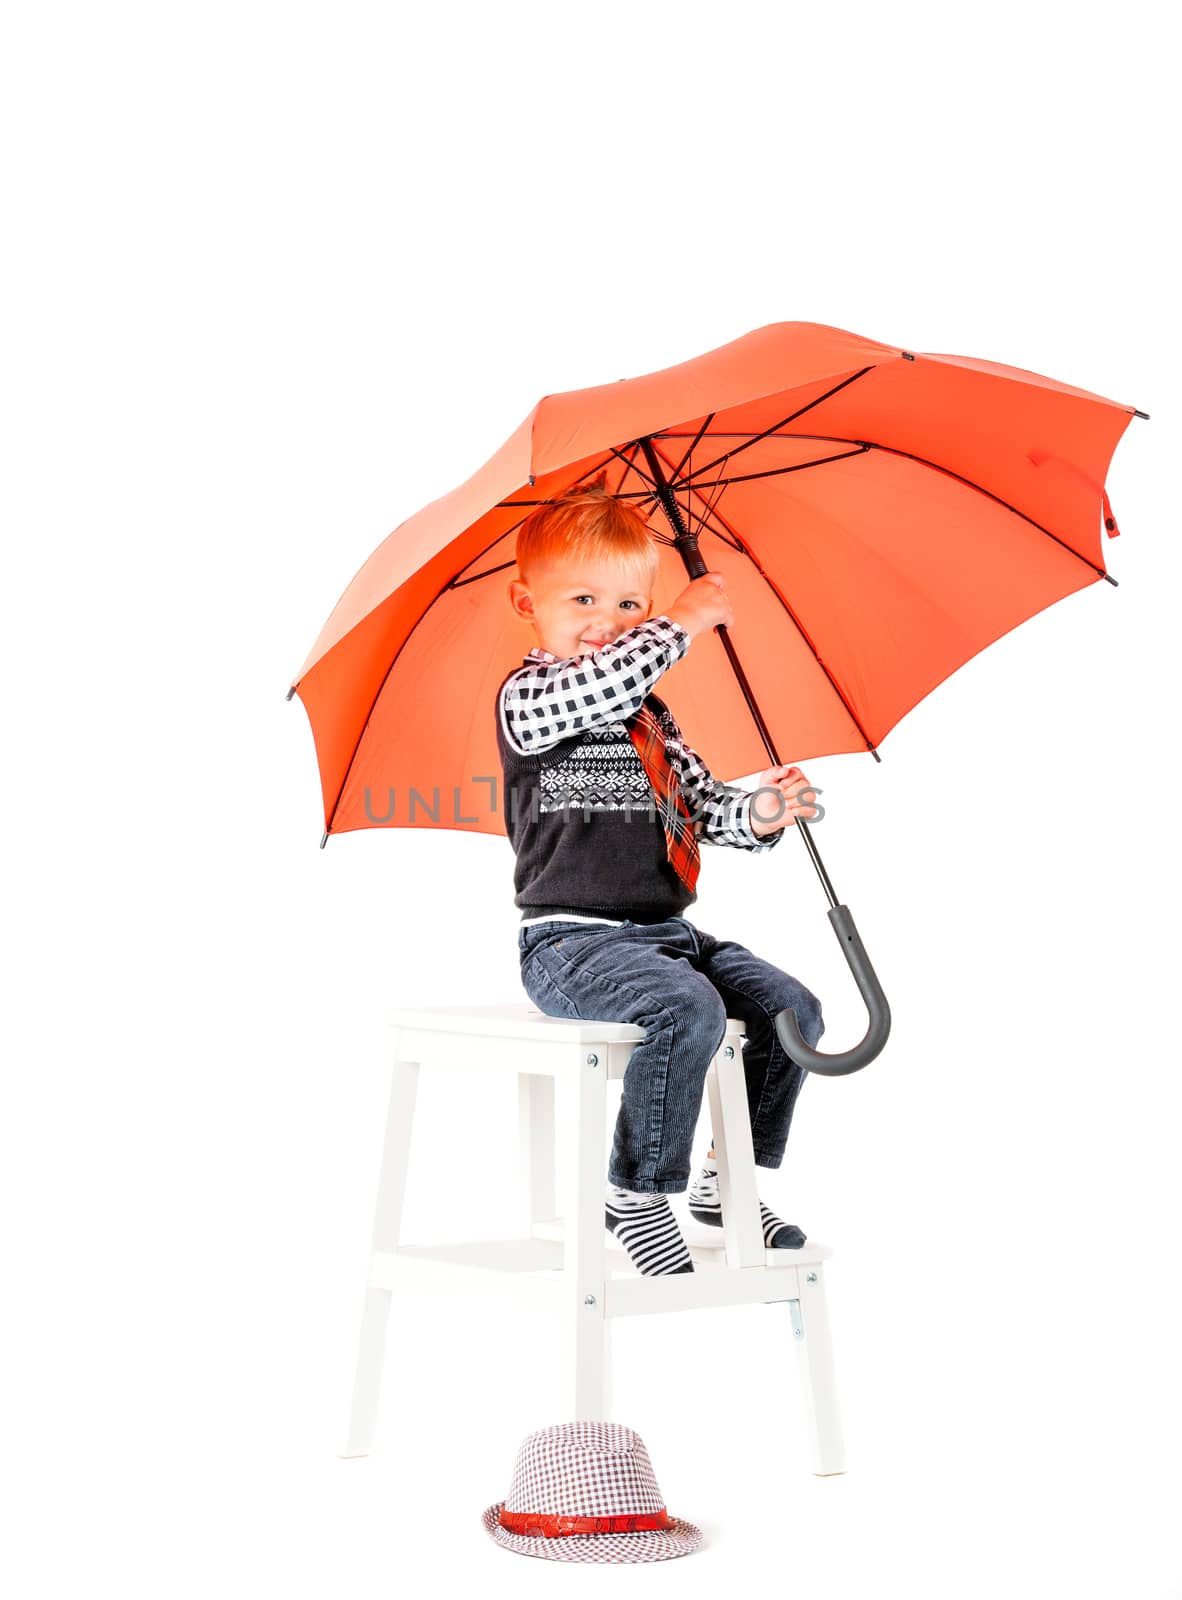 Smiling happy boy with umbrella shot in the studio on a white background